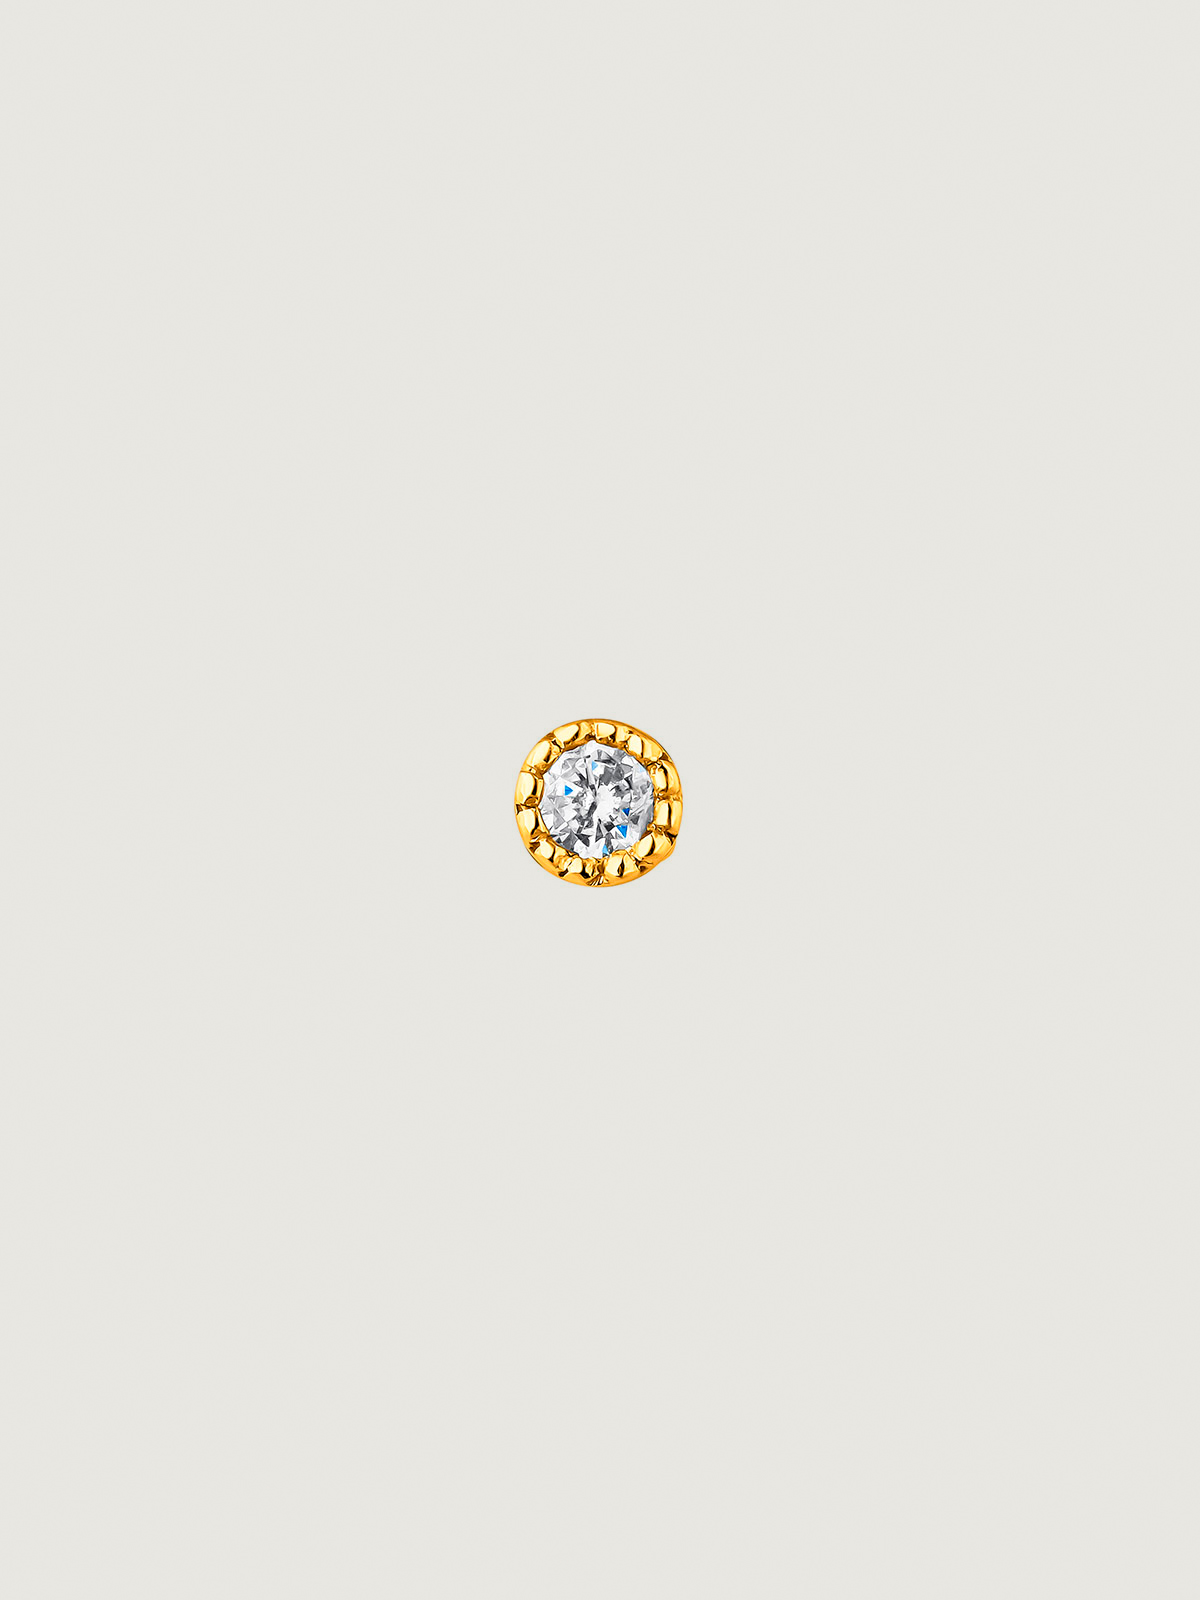 Individual 9K yellow gold piercing with diamond